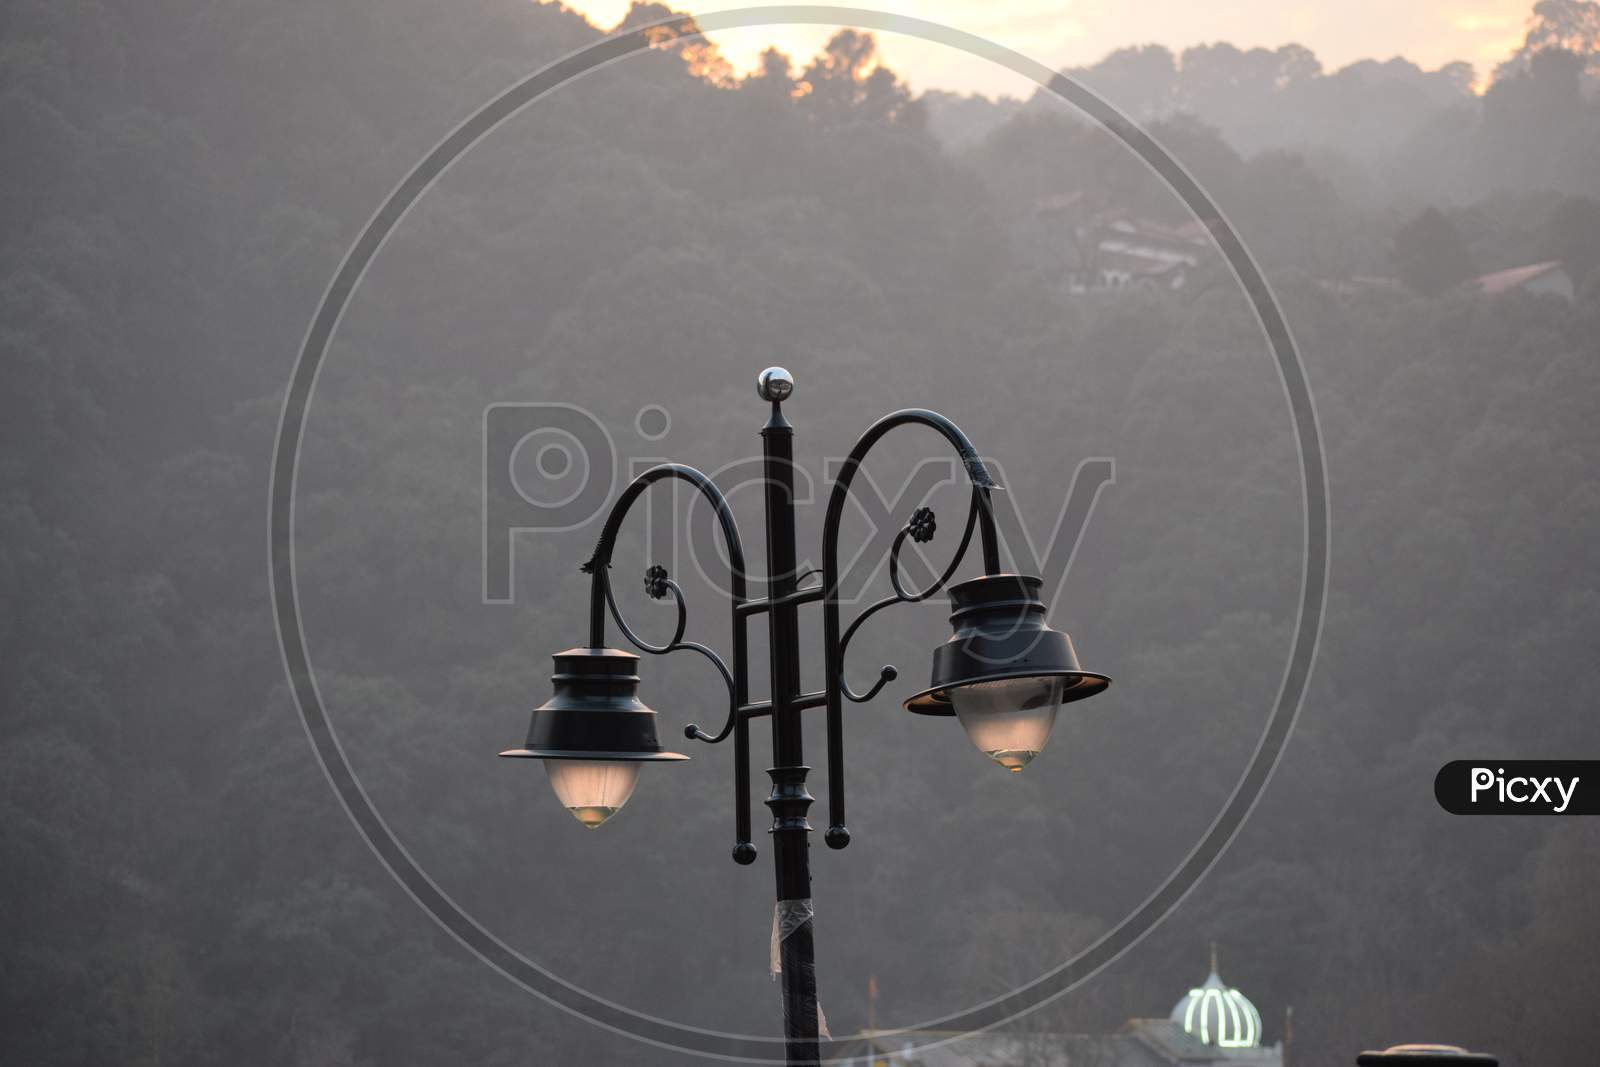 Beautiful Picture Of Road Side Lamp In India. Background Blur